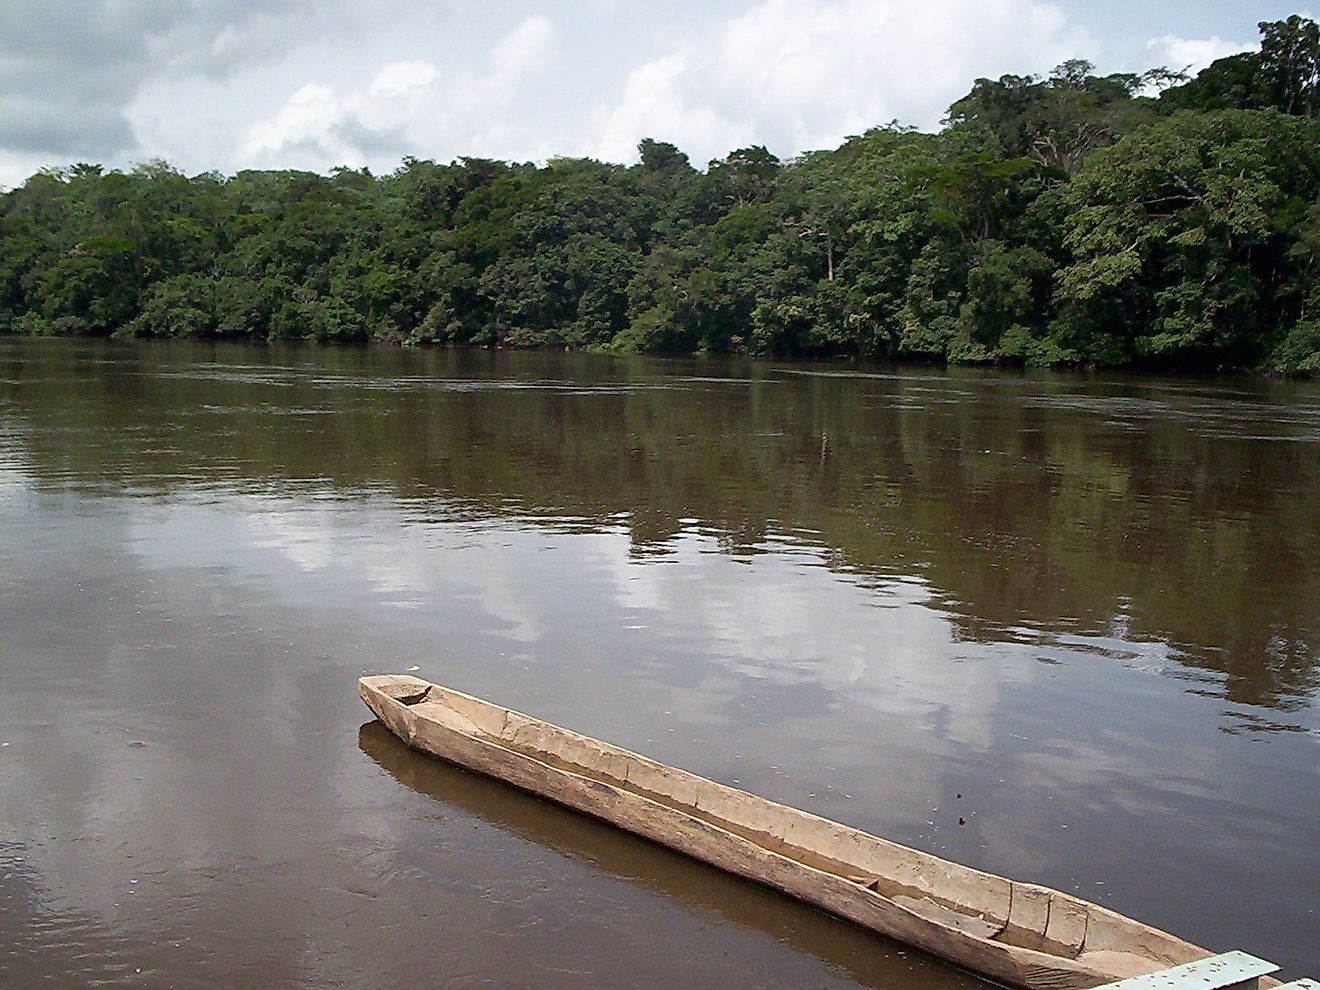 Pirogue on the Dja River in Cameroon's East Province, south of Lomié and north of Ngoila. Image credit Amcaja via Wikimedia Commons